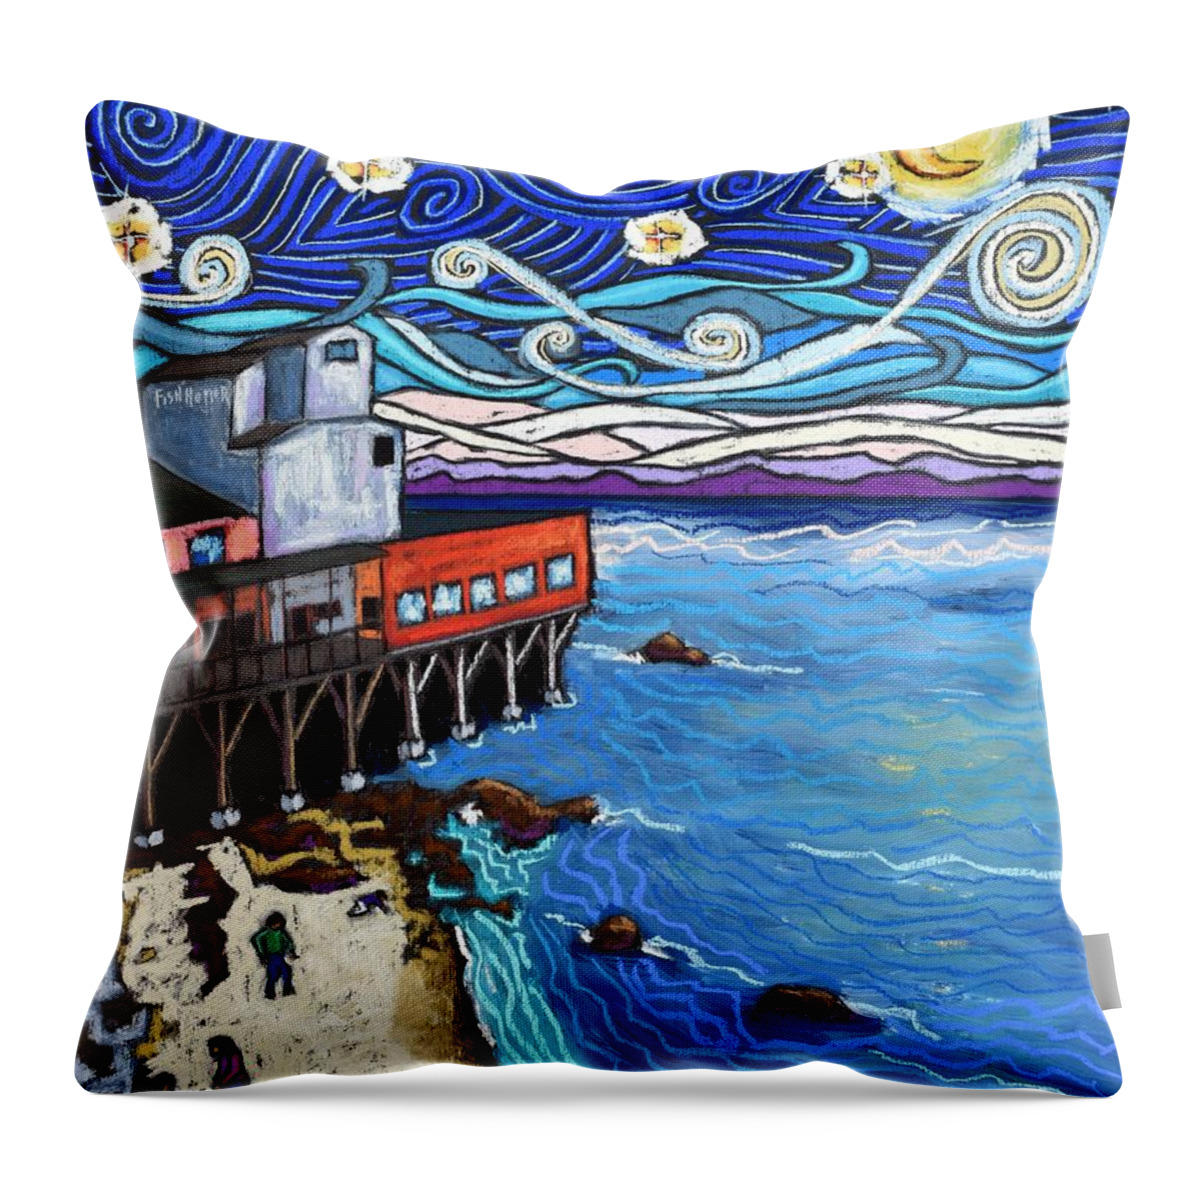 Starry Throw Pillow featuring the painting Starry Night Over Monterey Bay by David Hinds